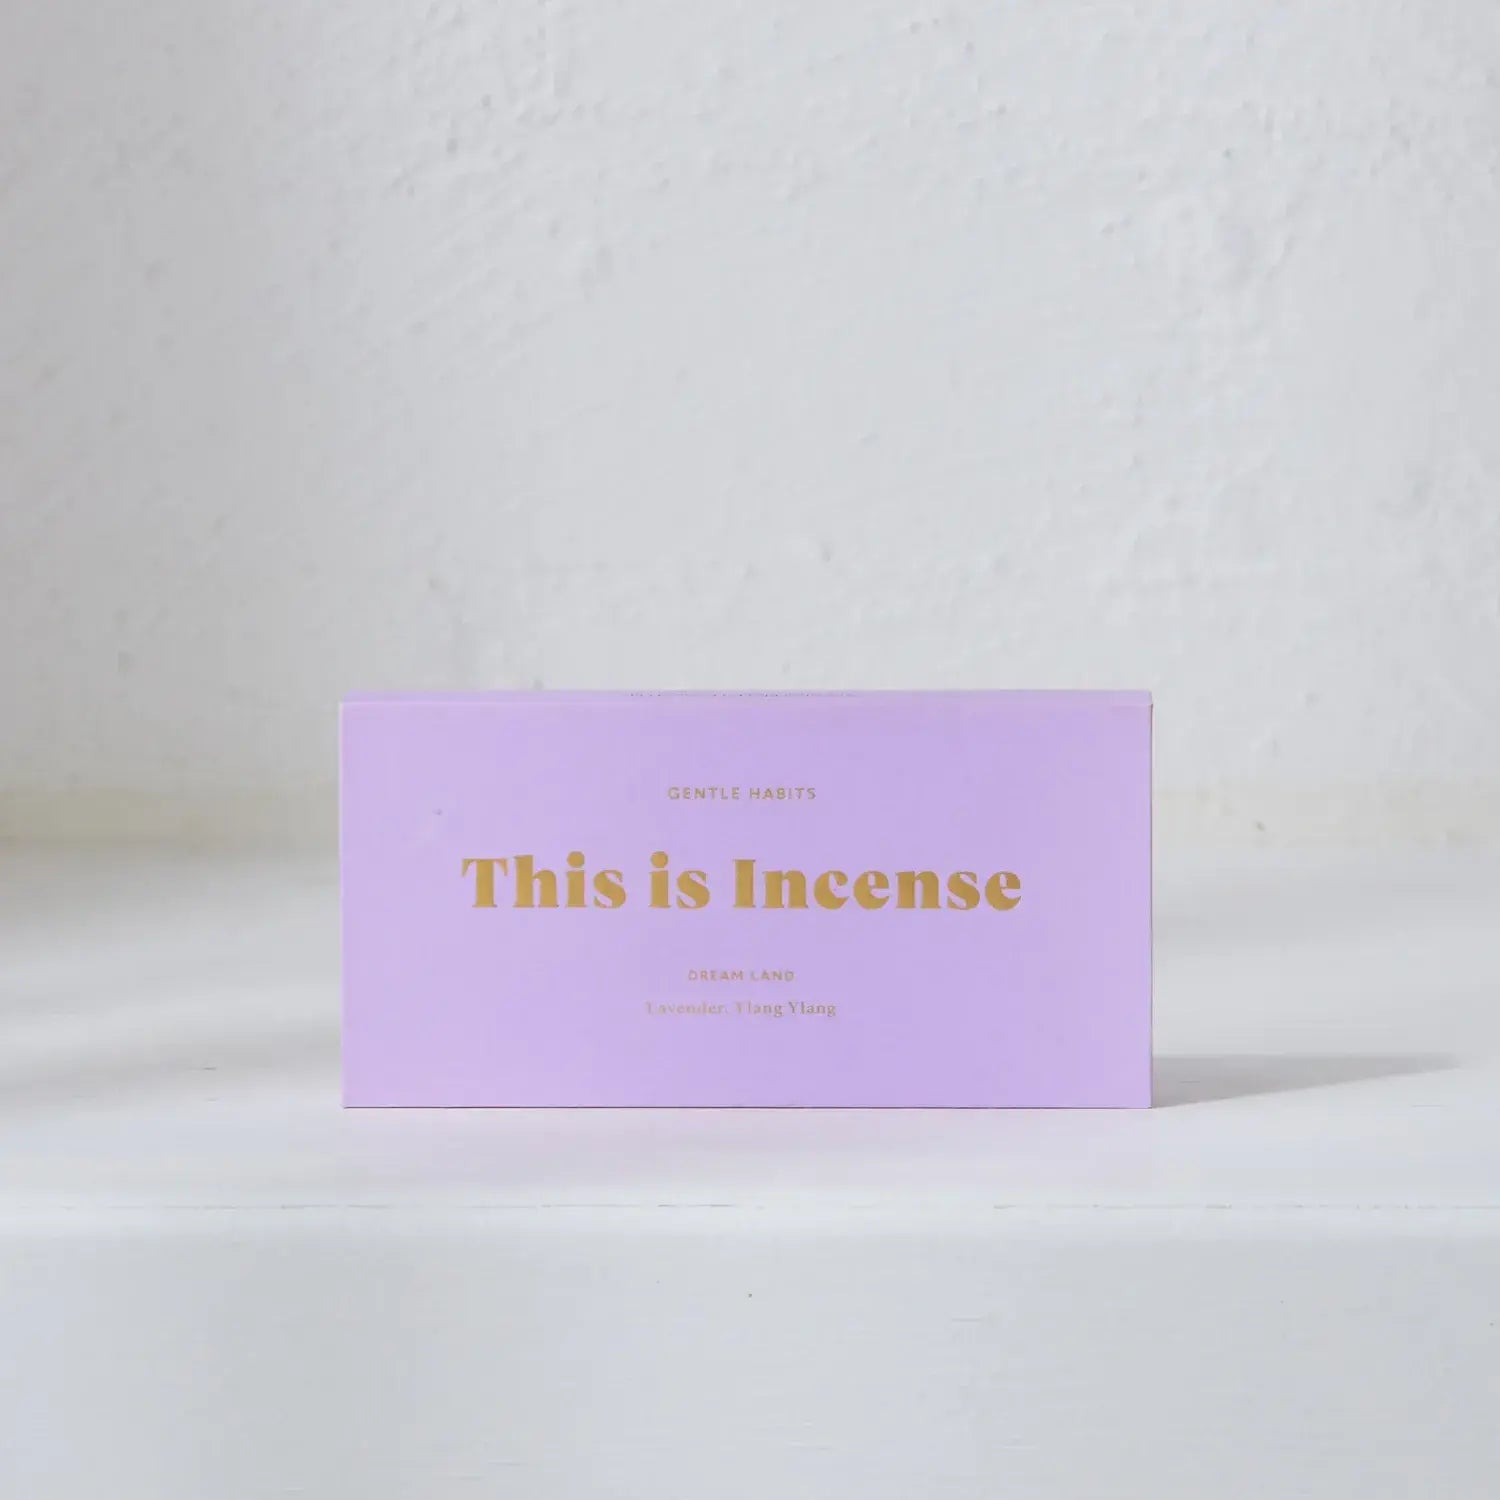 This is Incense by Gentle Habits - Dreamland